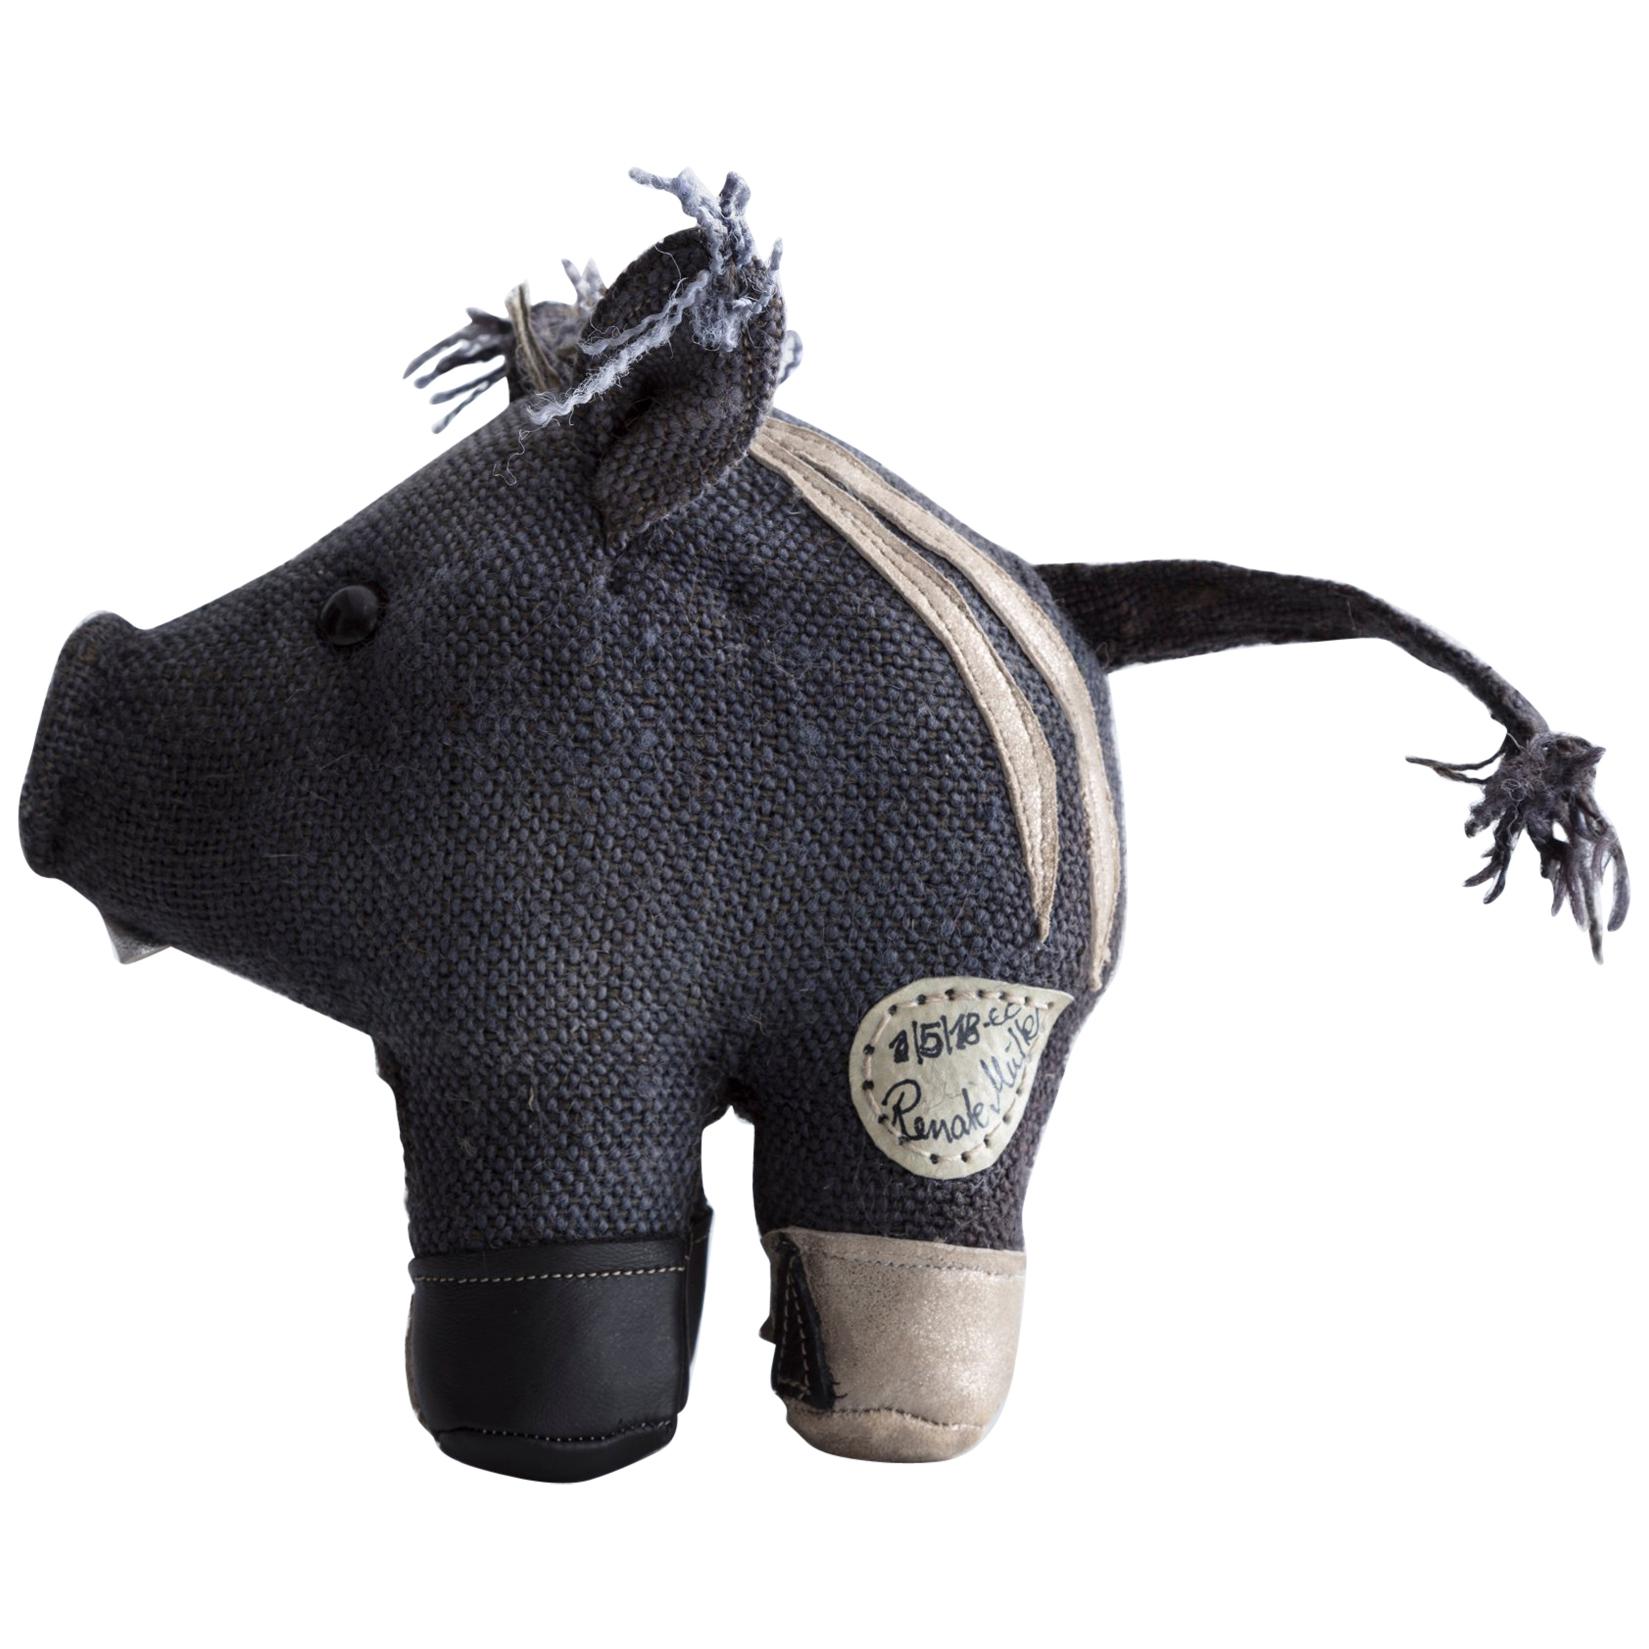 Therapeutic Wild Boar Toy in Jute and Leather by Renate Müller, 2005